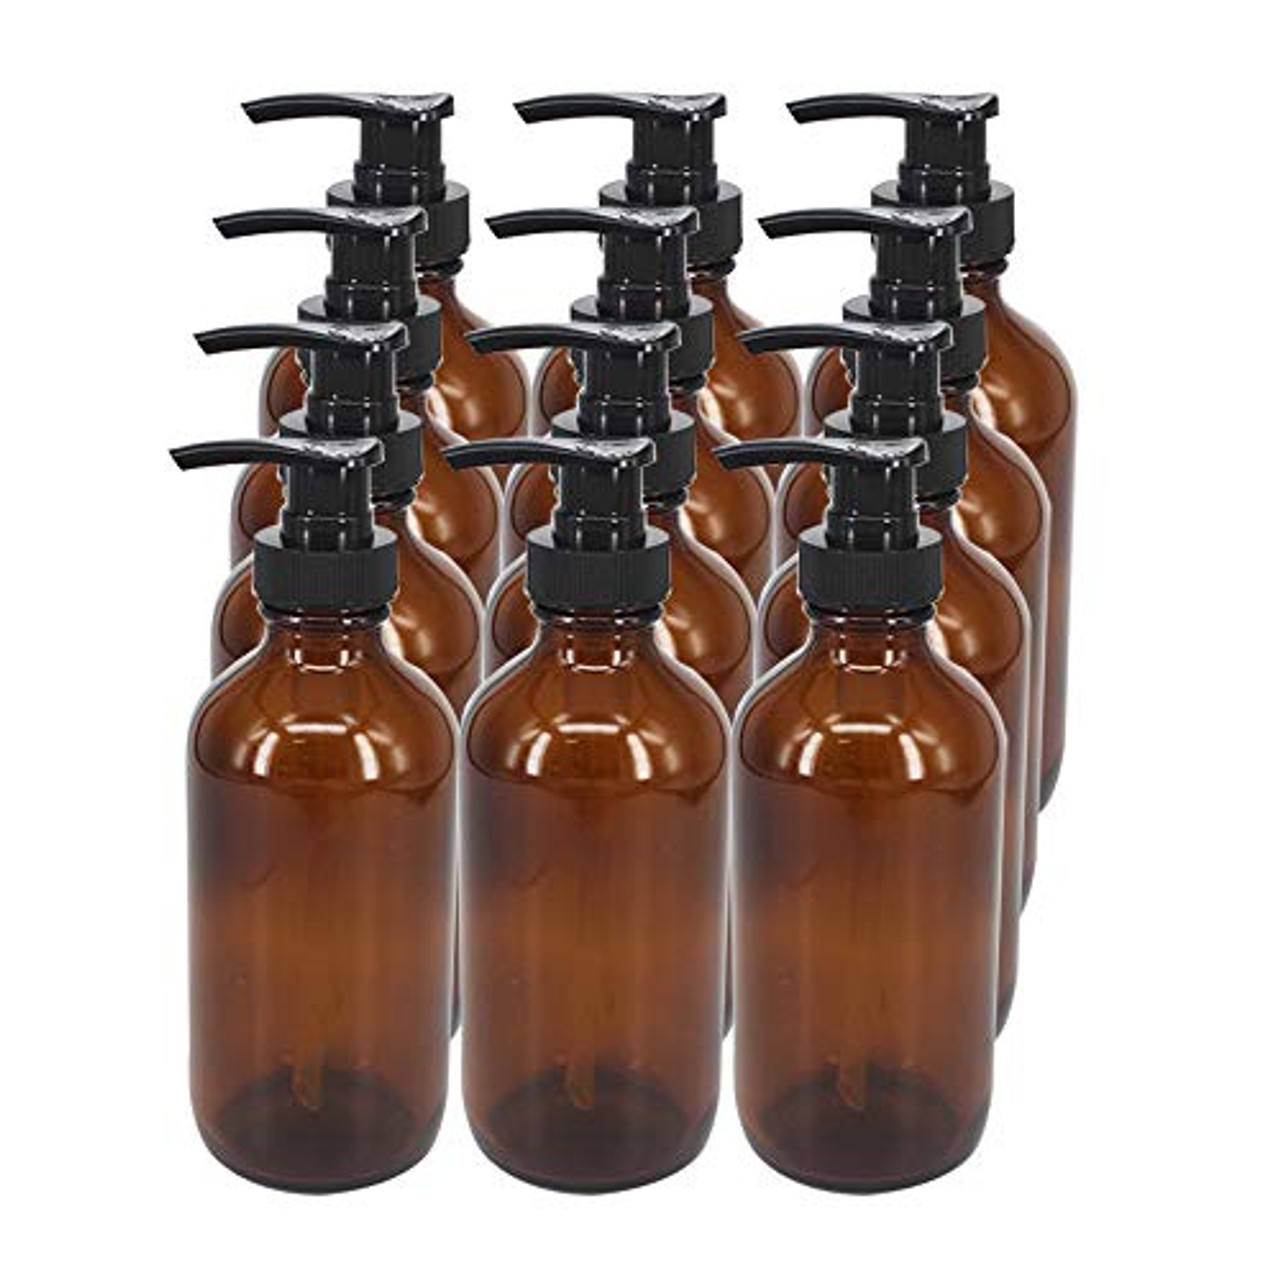 8-Oz. Amber Glass Bottles with Caps